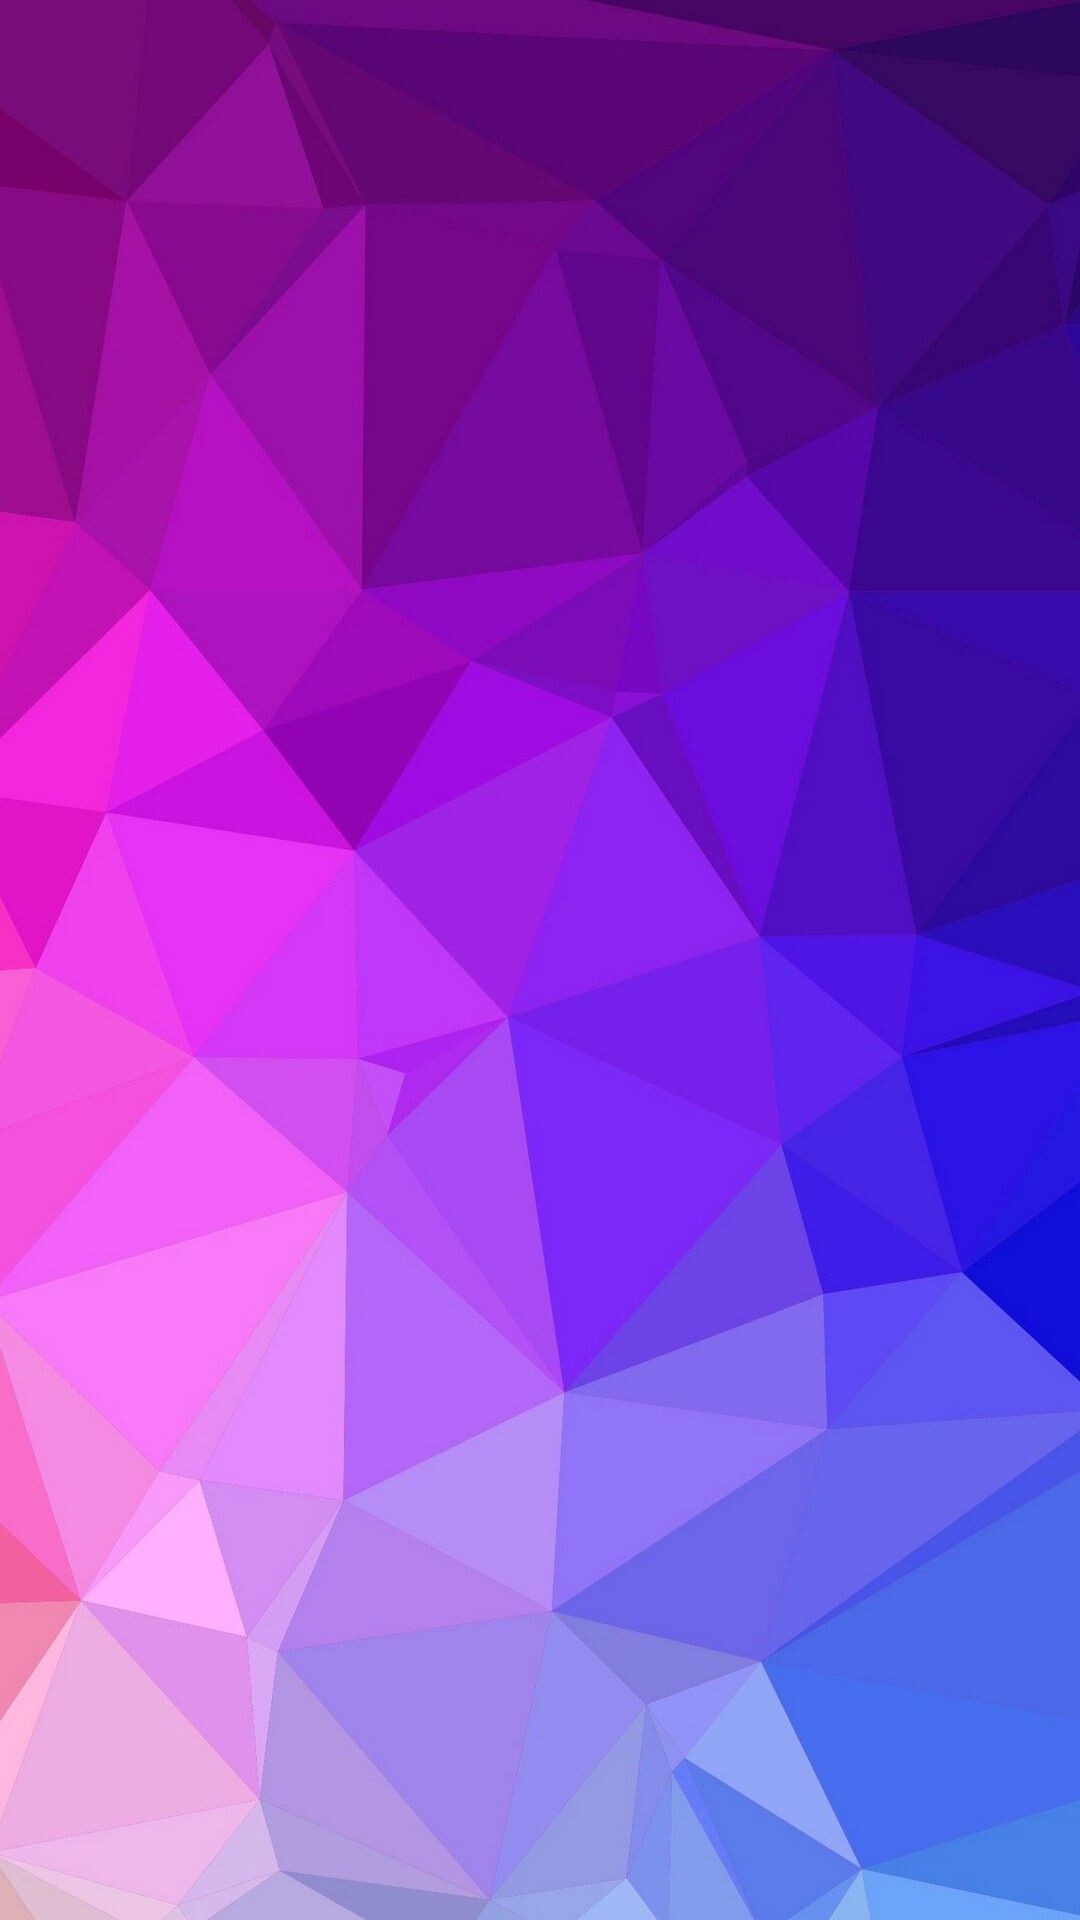 Geometric Abstract: Polygonal figures, Colorful gradient, Supplementary angles. 1080x1920 Full HD Wallpaper.